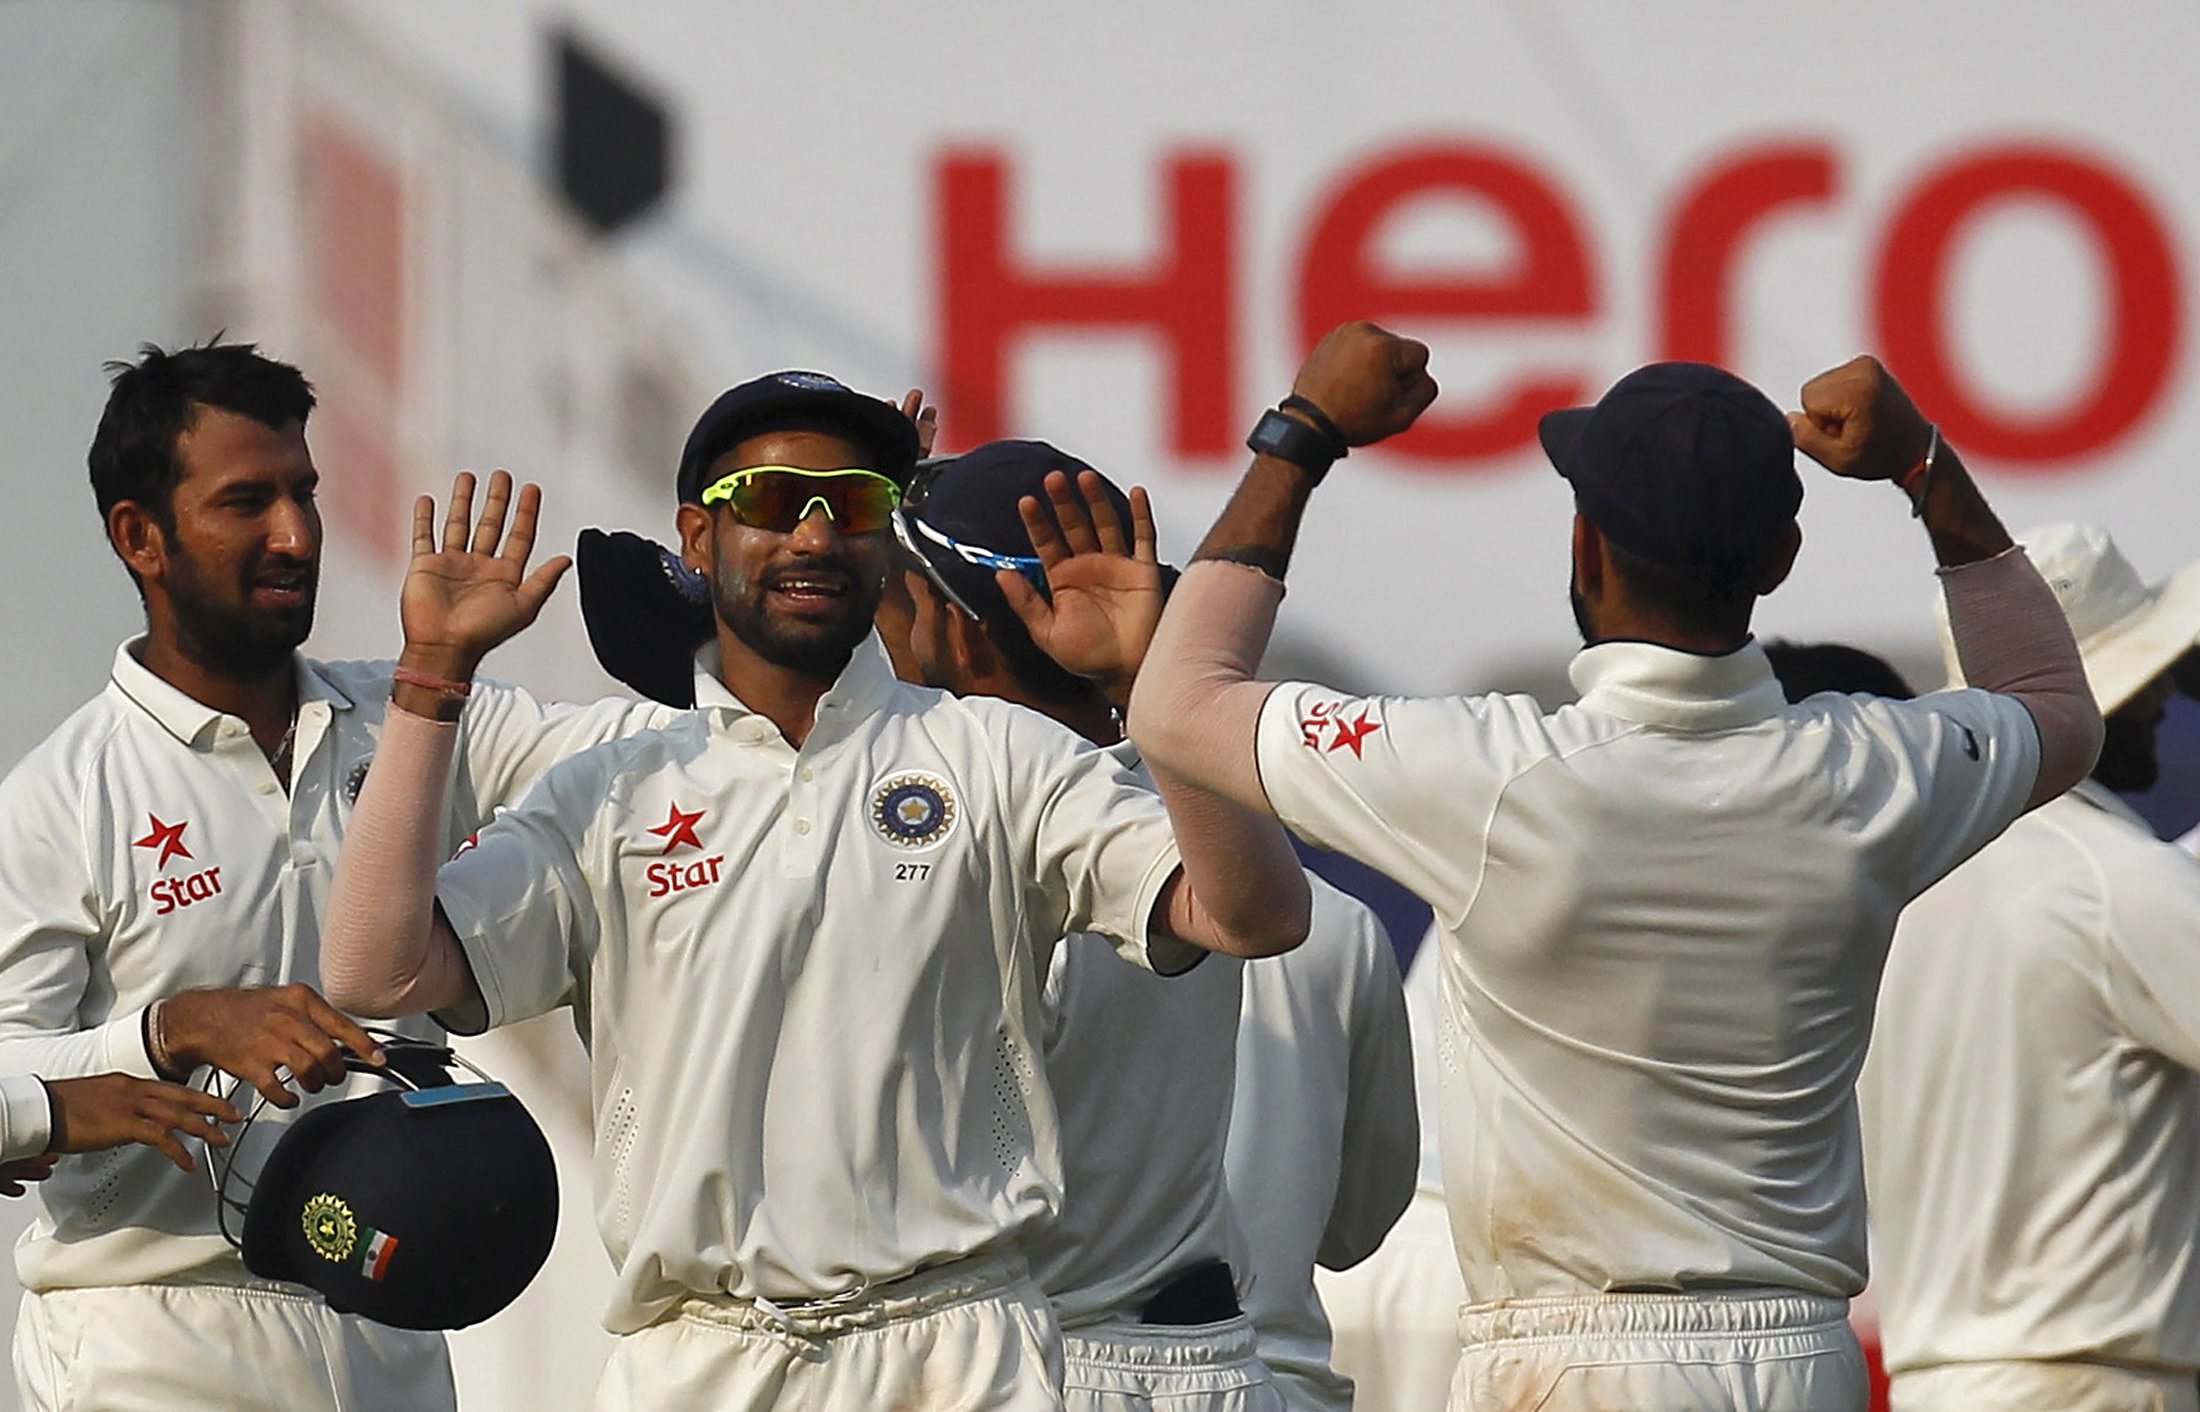 India's Cheteshwar Pujara (L), Shikhar Dhawan (C) and captain Virat Kohli celebrate after their win over South Africa on the third day of their third test cricket match in Nagpur, India, November 27, 2015. Photo: Reuters